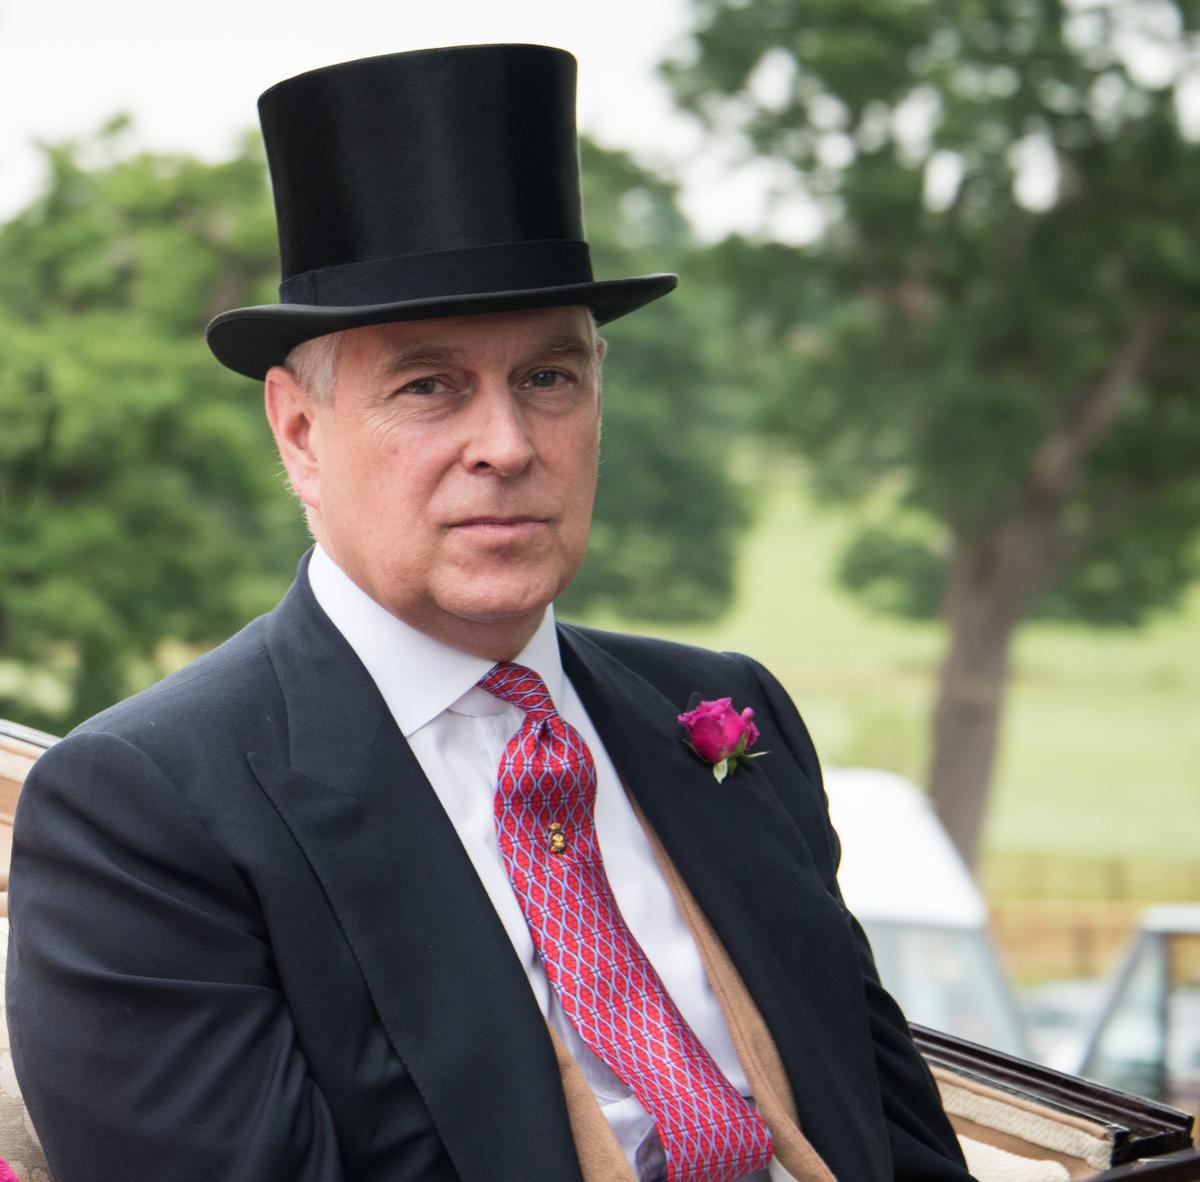 Prince Andrew was appointed to the role of president in 1999
/ Shutterstock